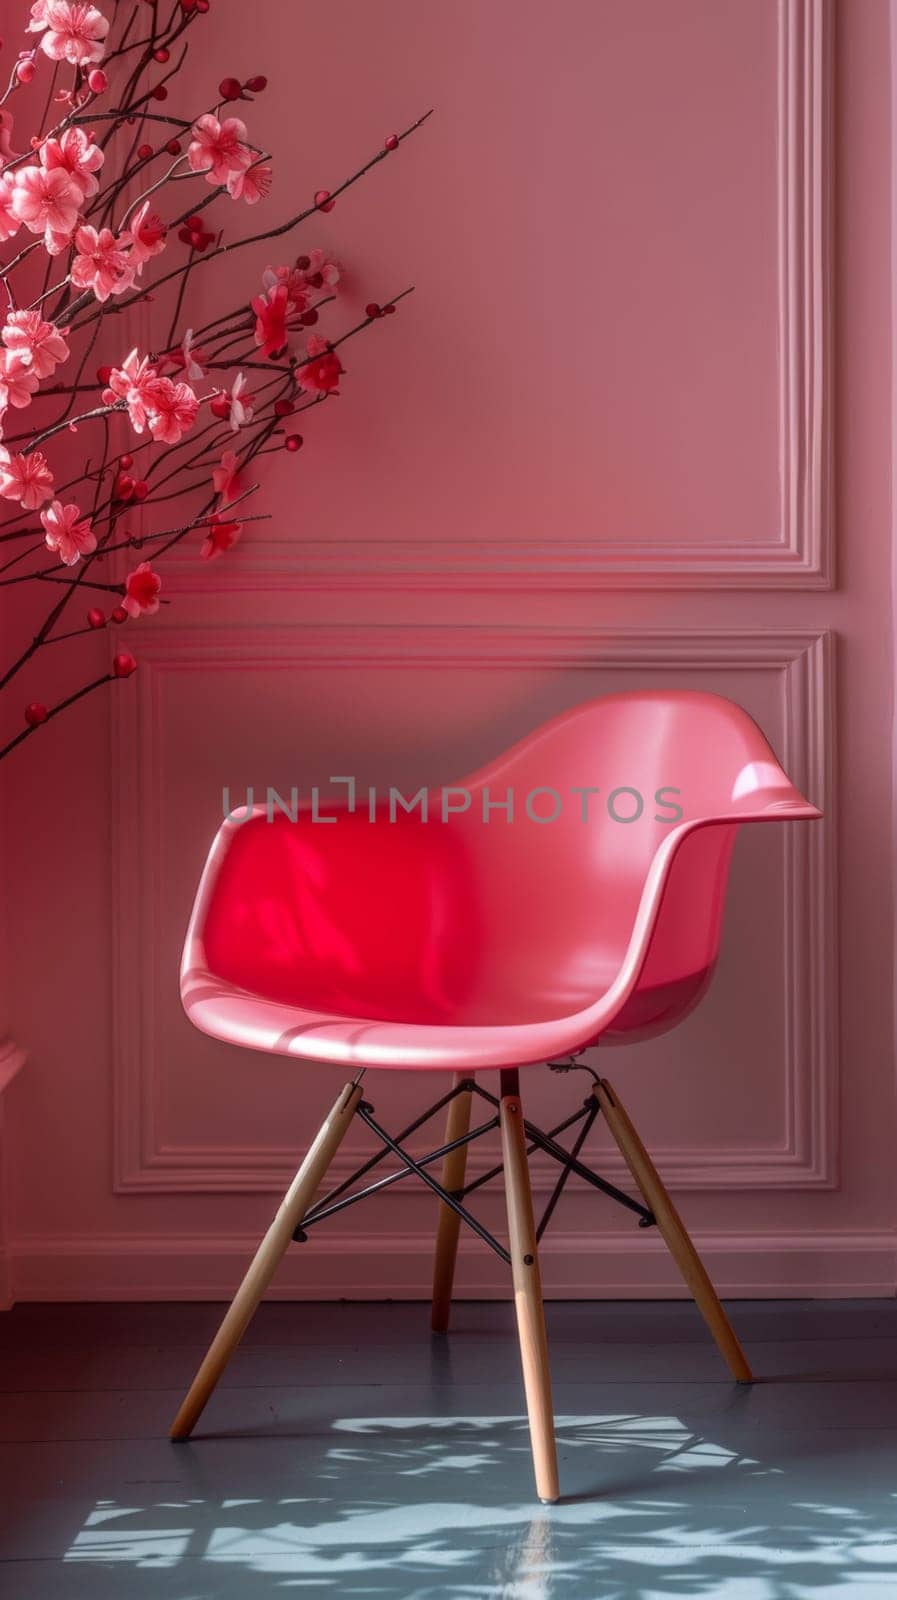 A pink chair sitting in front of a wall with flowers